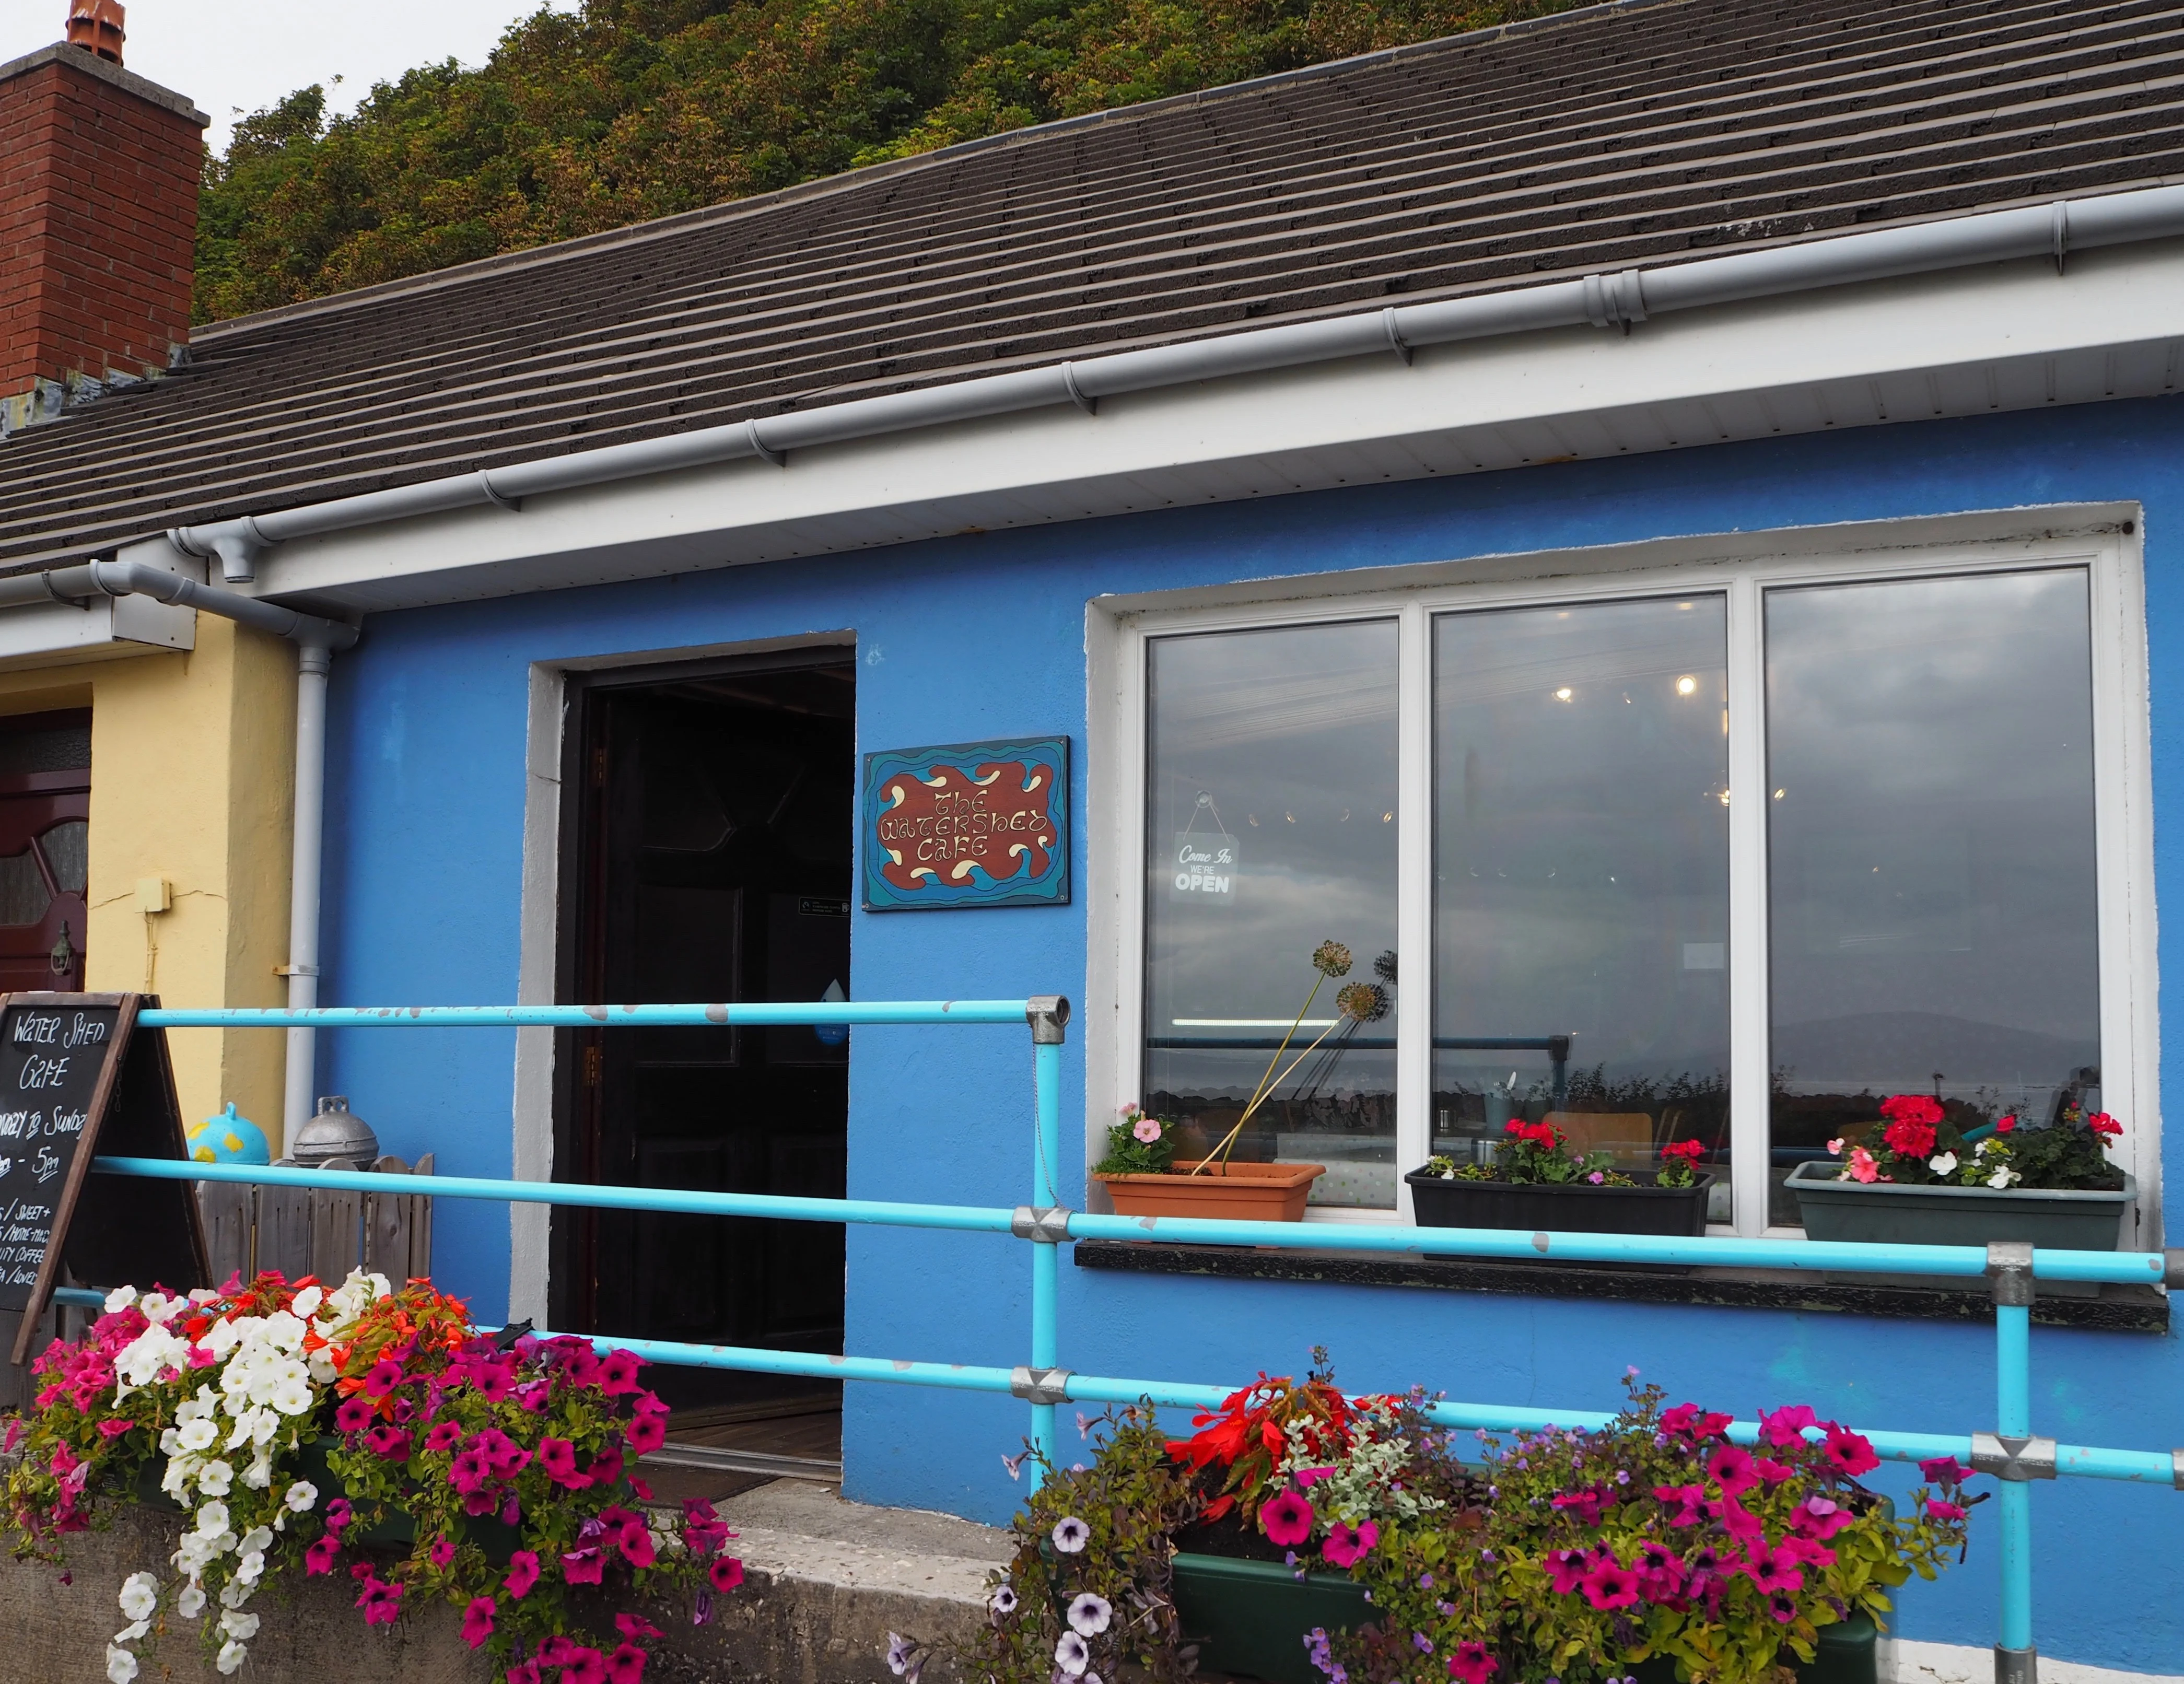 Cafe on Rathlin Island - Beyond the City Break in Belfast with Flybe and Avis